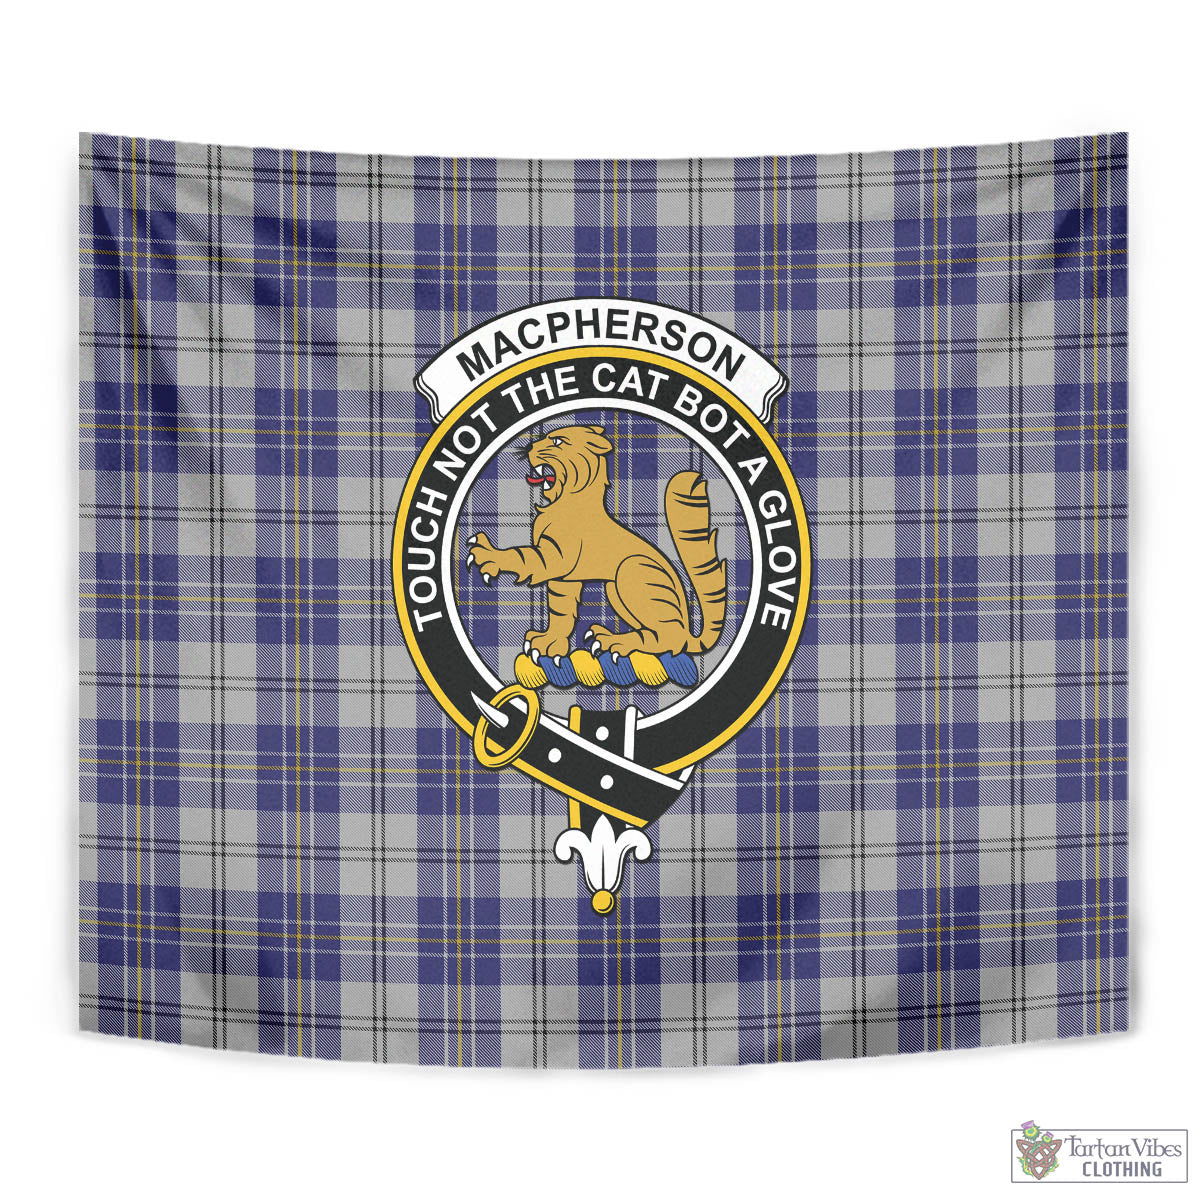 Tartan Vibes Clothing MacPherson Dress Blue Tartan Tapestry Wall Hanging and Home Decor for Room with Family Crest